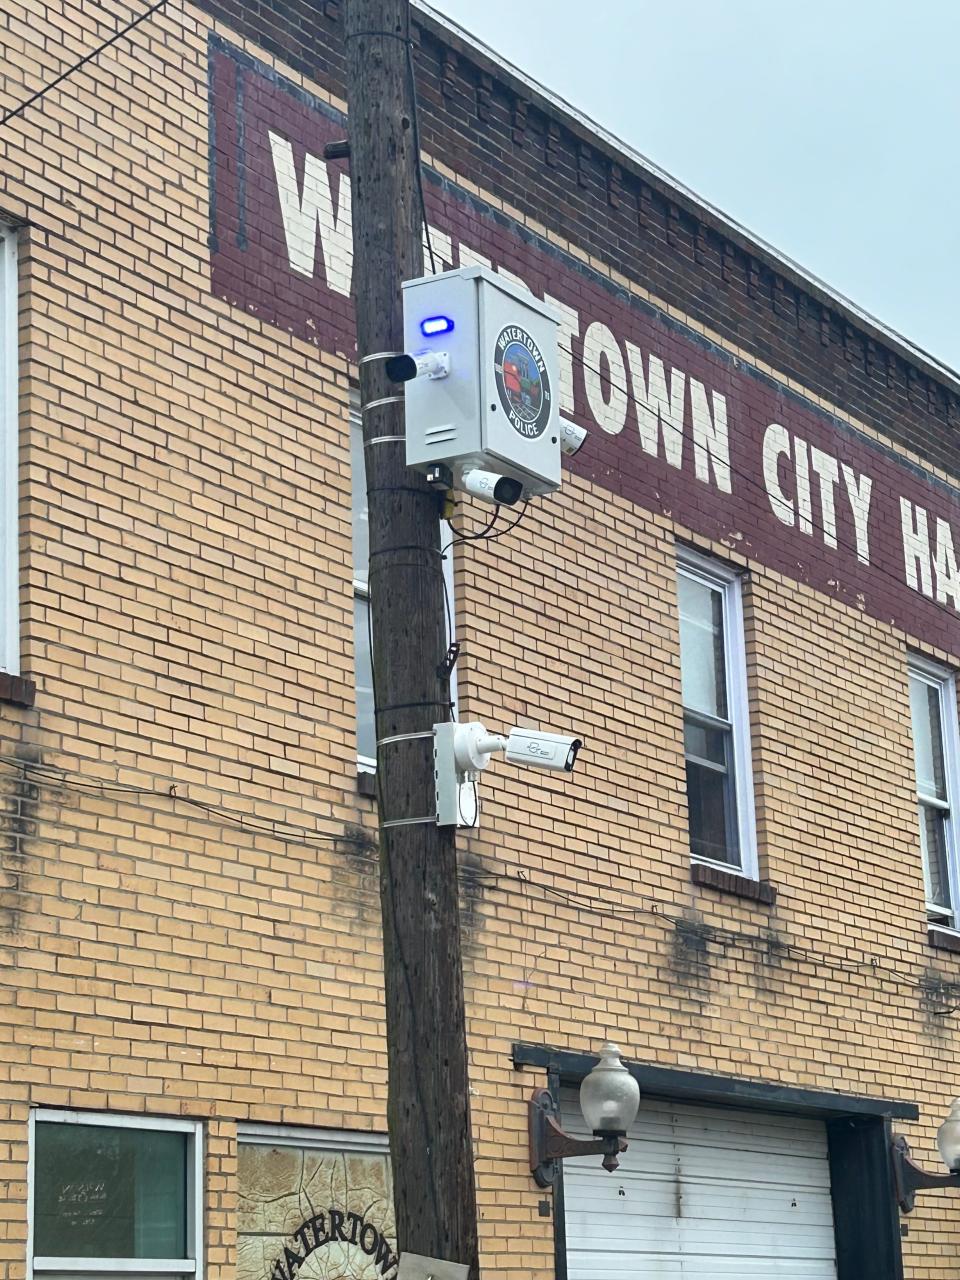 Watertown has installed new License Plate Reader cameras in the city.